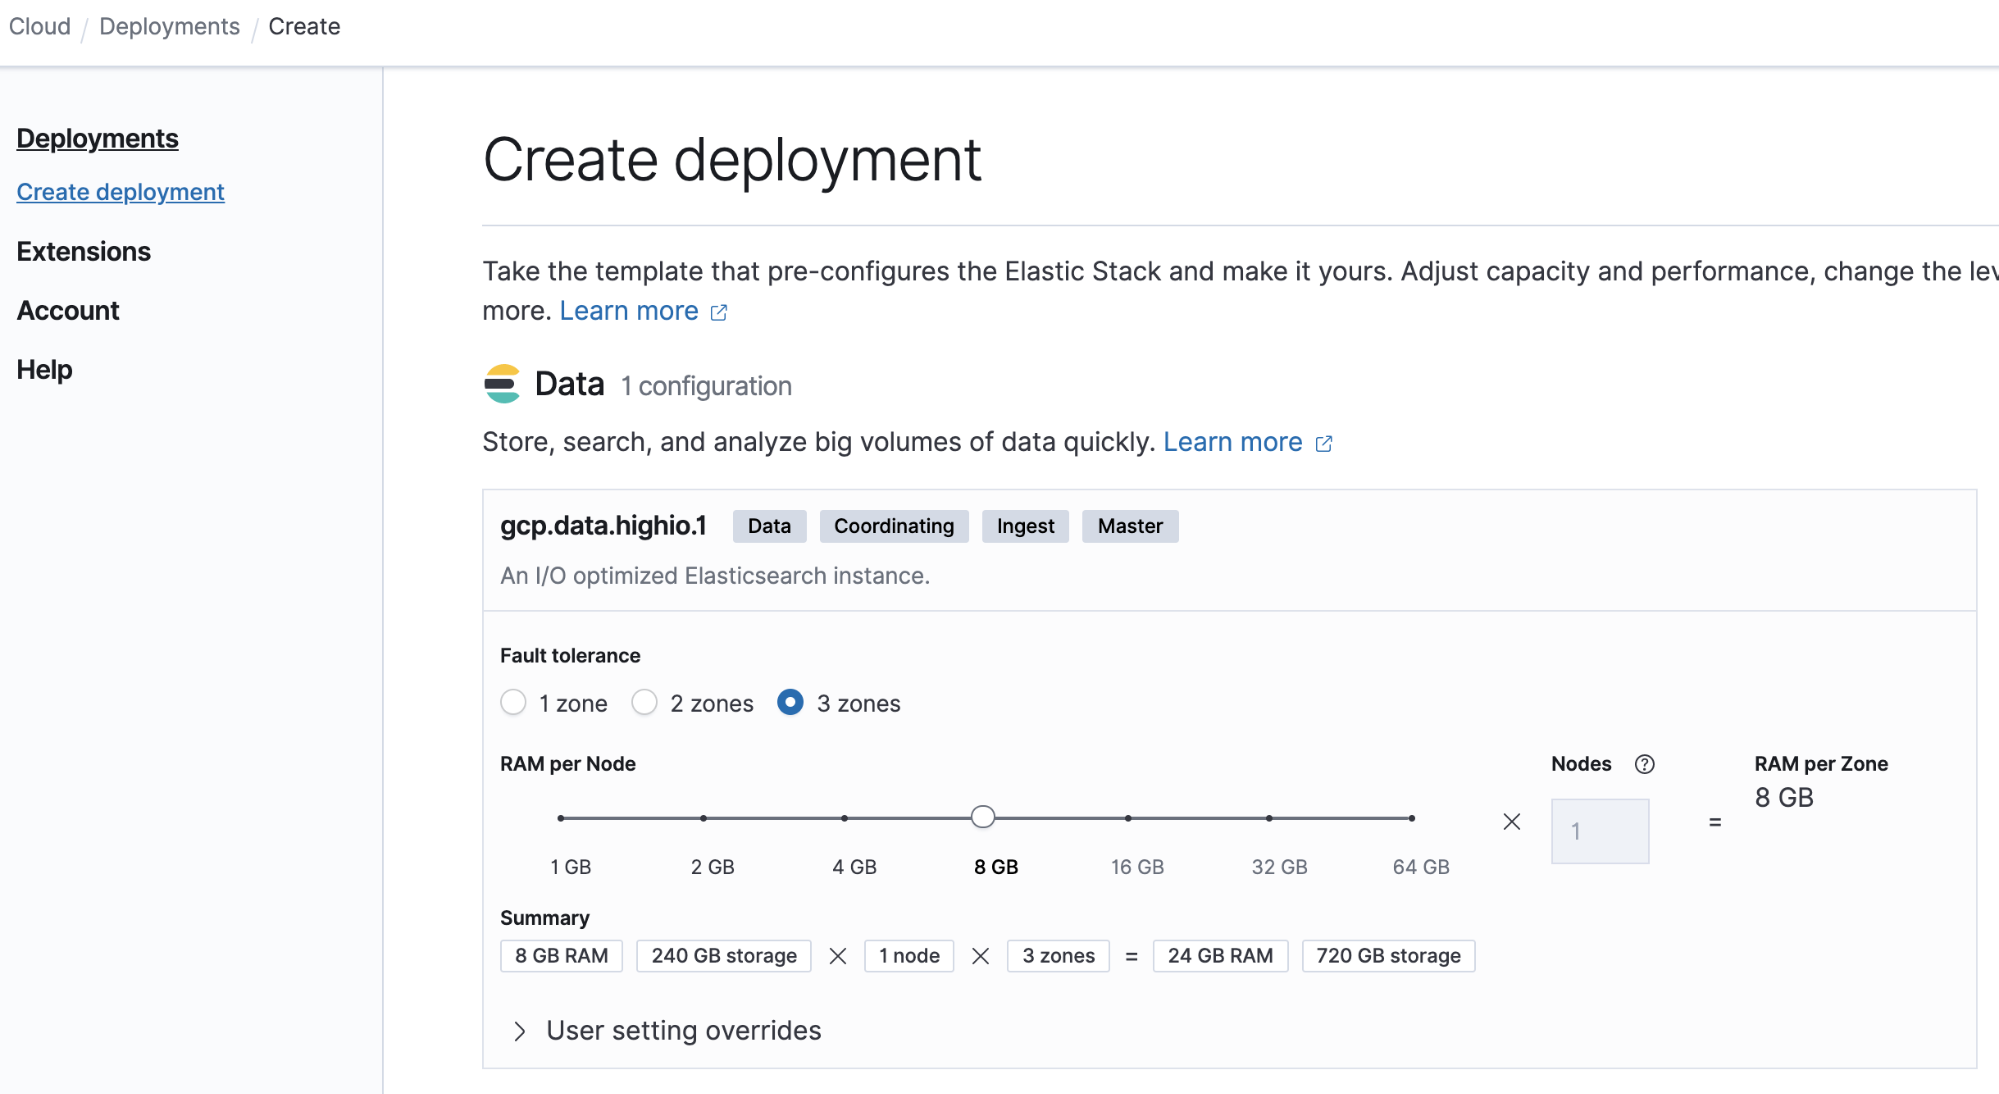 Sizing your small cluster in Elastic Cloud